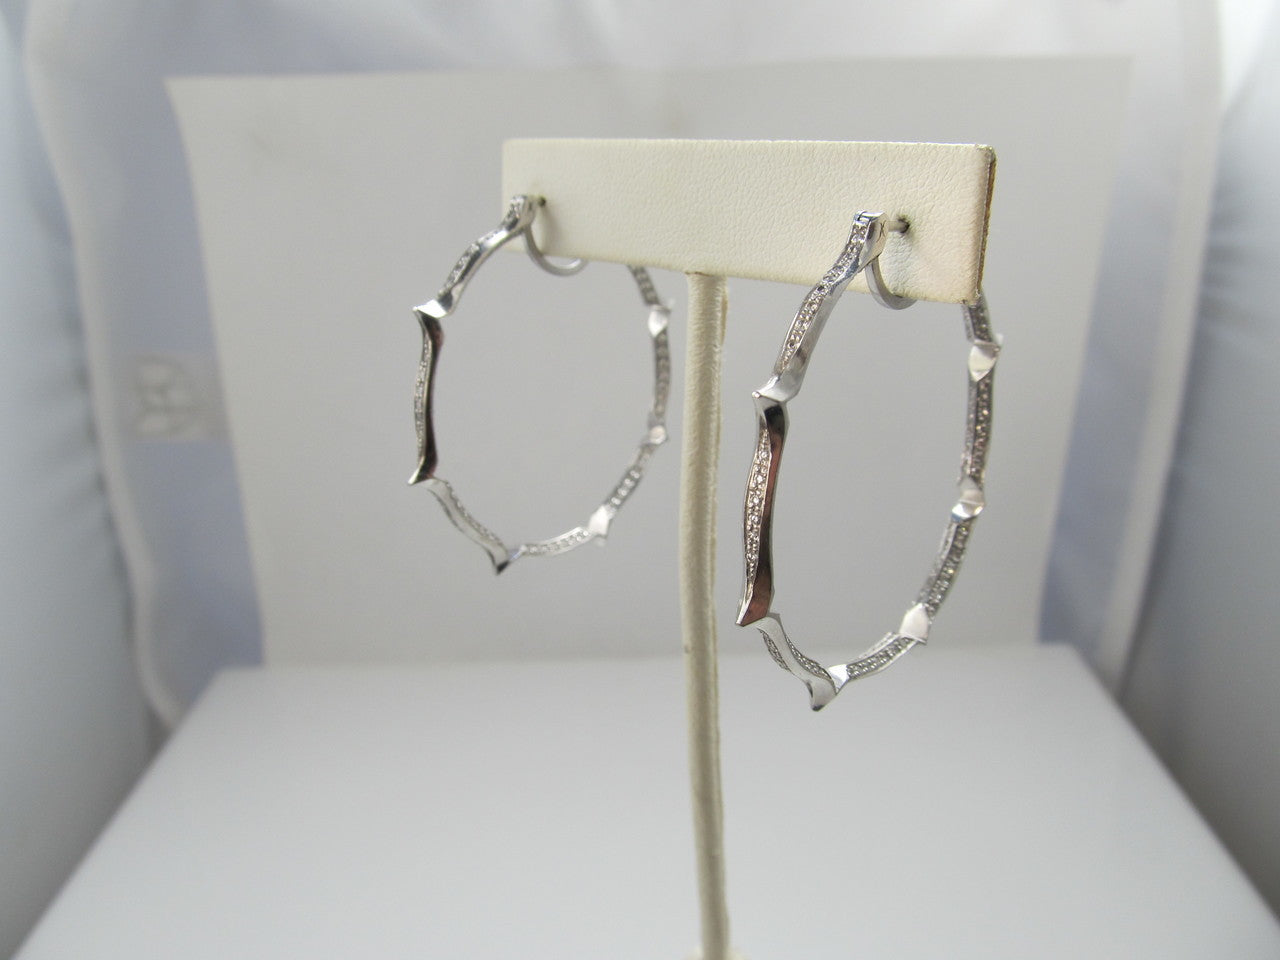 18k white gold hoop earrings with 2cts in diamonds